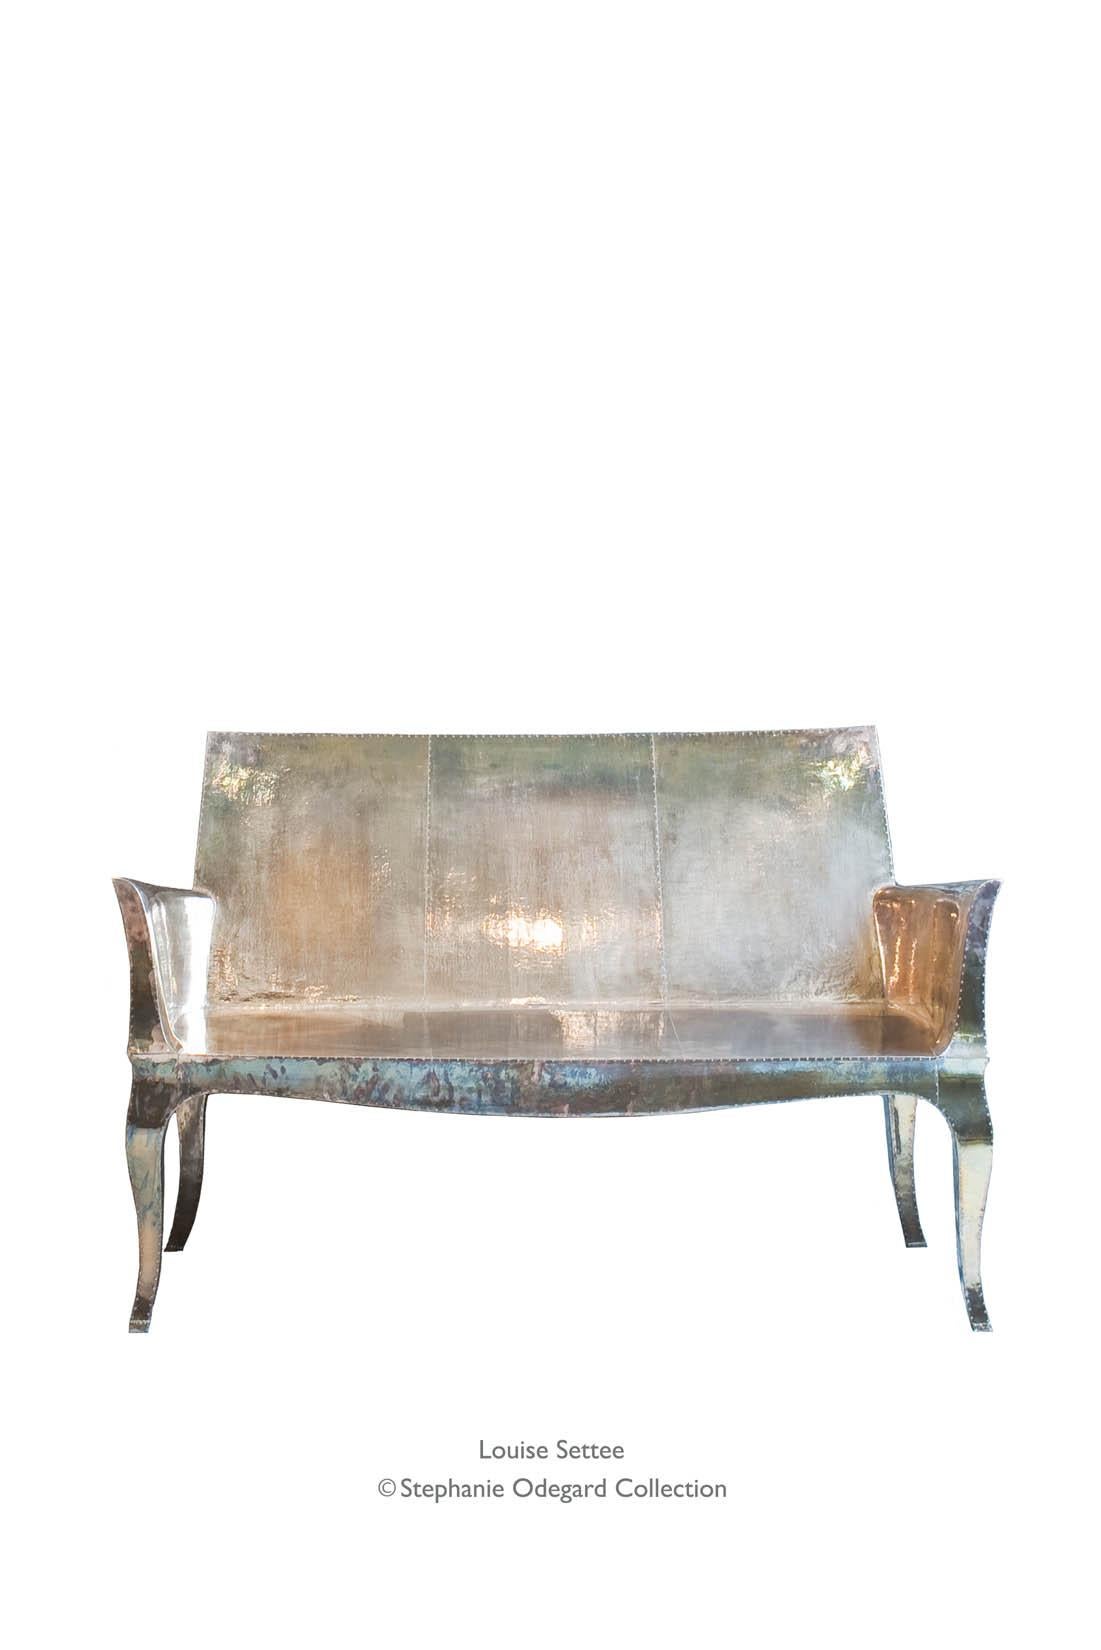 Louise Settee Art Deco Daybeds in Fine Hammered Antique Bronze by Paul Mathieu  For Sale 6